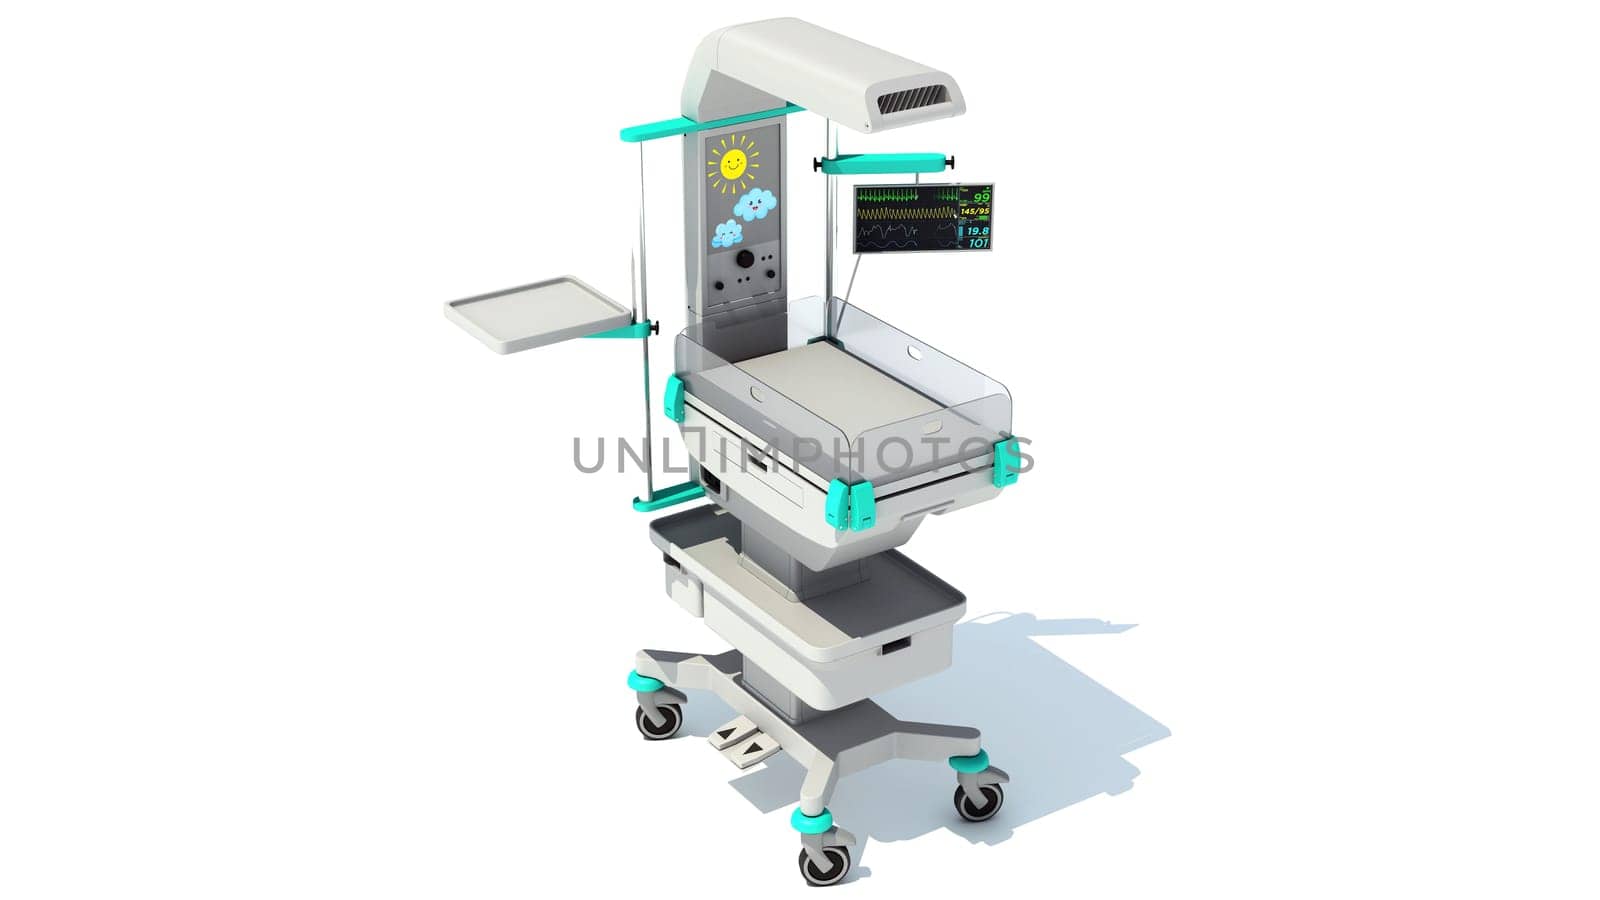 Anesthesia Respiratory Workstation Trolley medical equipment 3D rendering on white background by 3DHorse